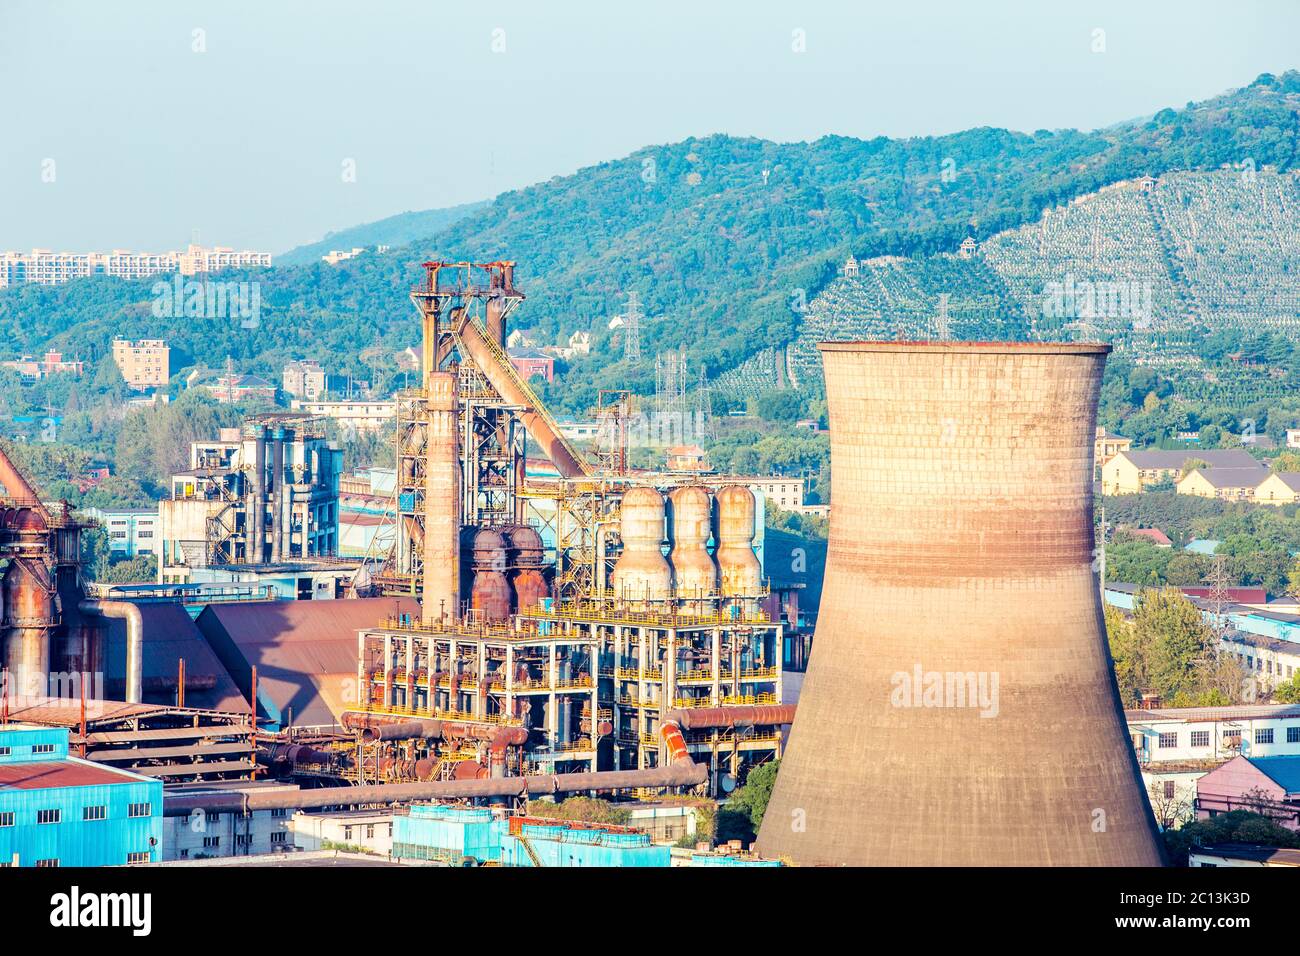 constructions of power plant in steel factory Stock Photo